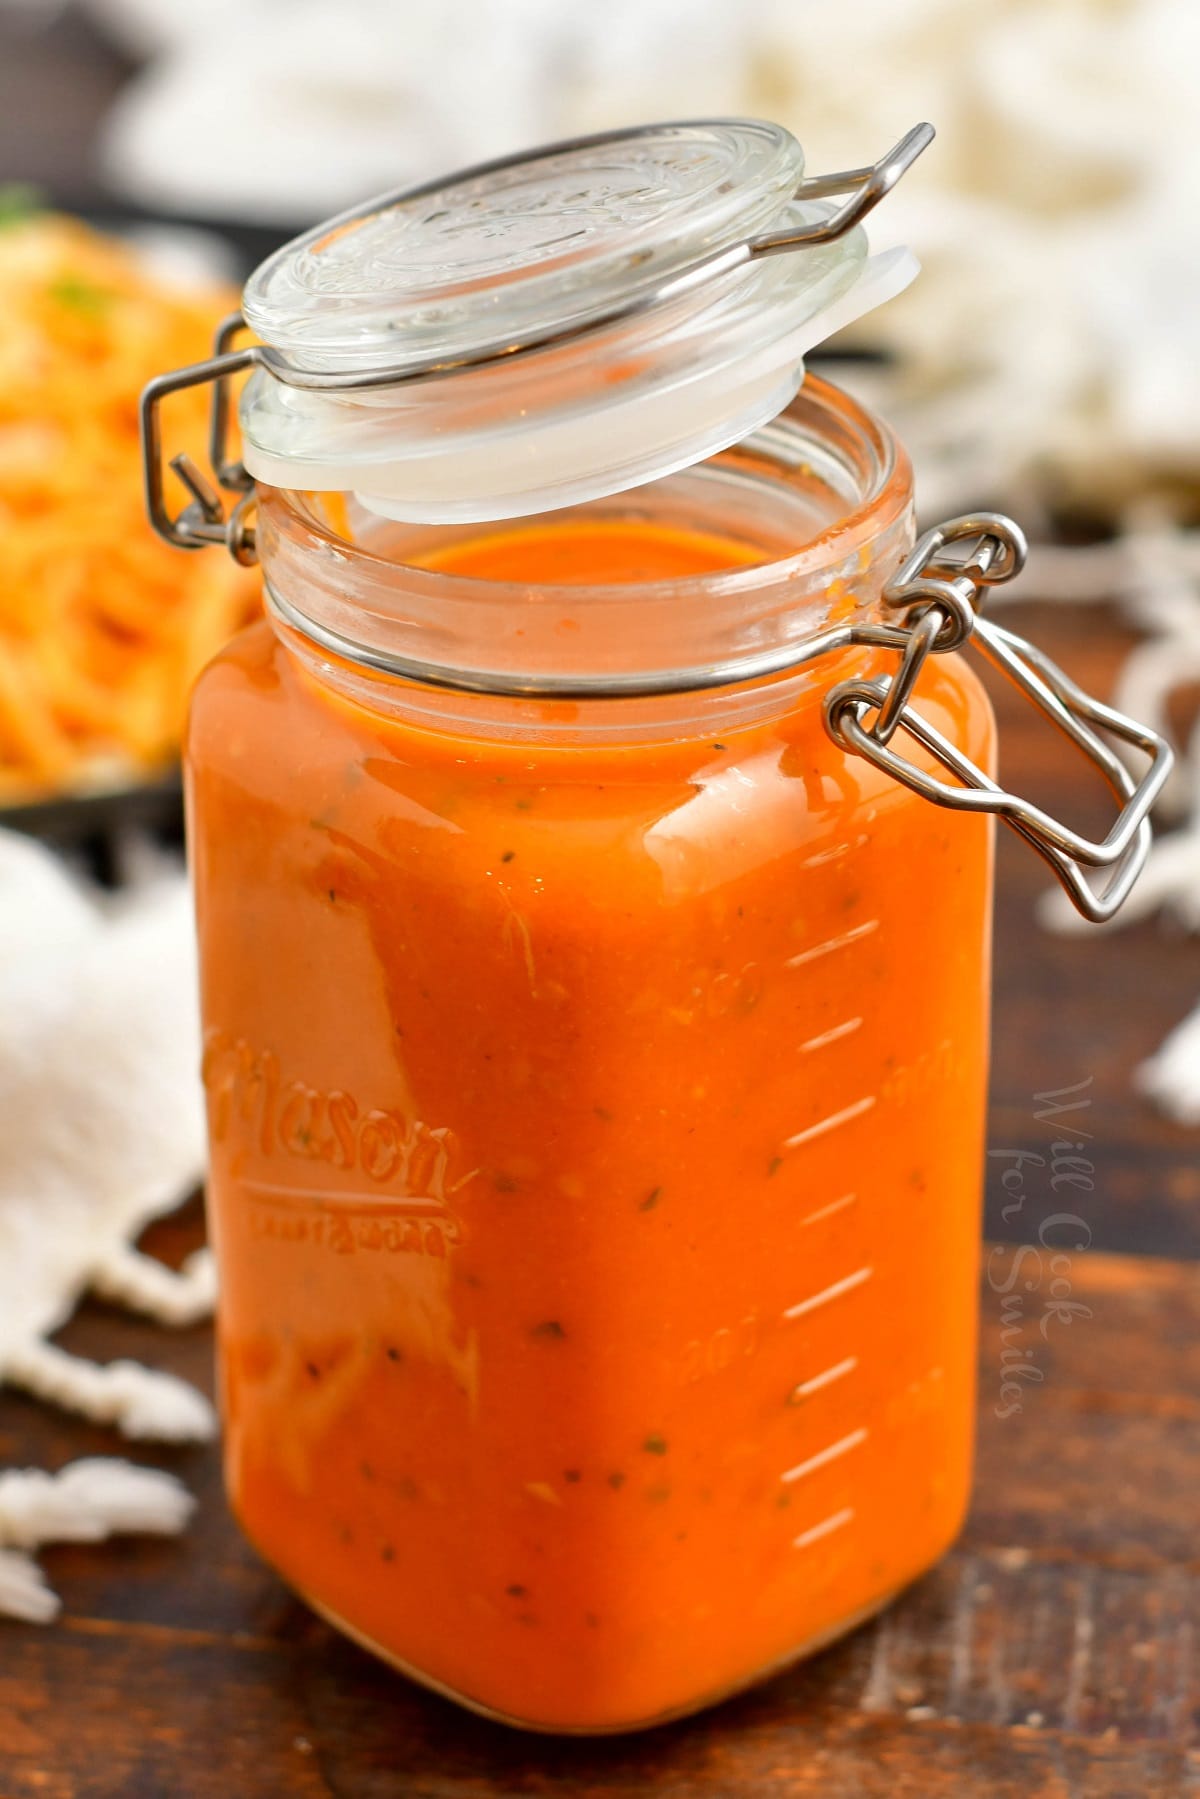 Pomodoro sauce in a glass jar with spaghetti on a background